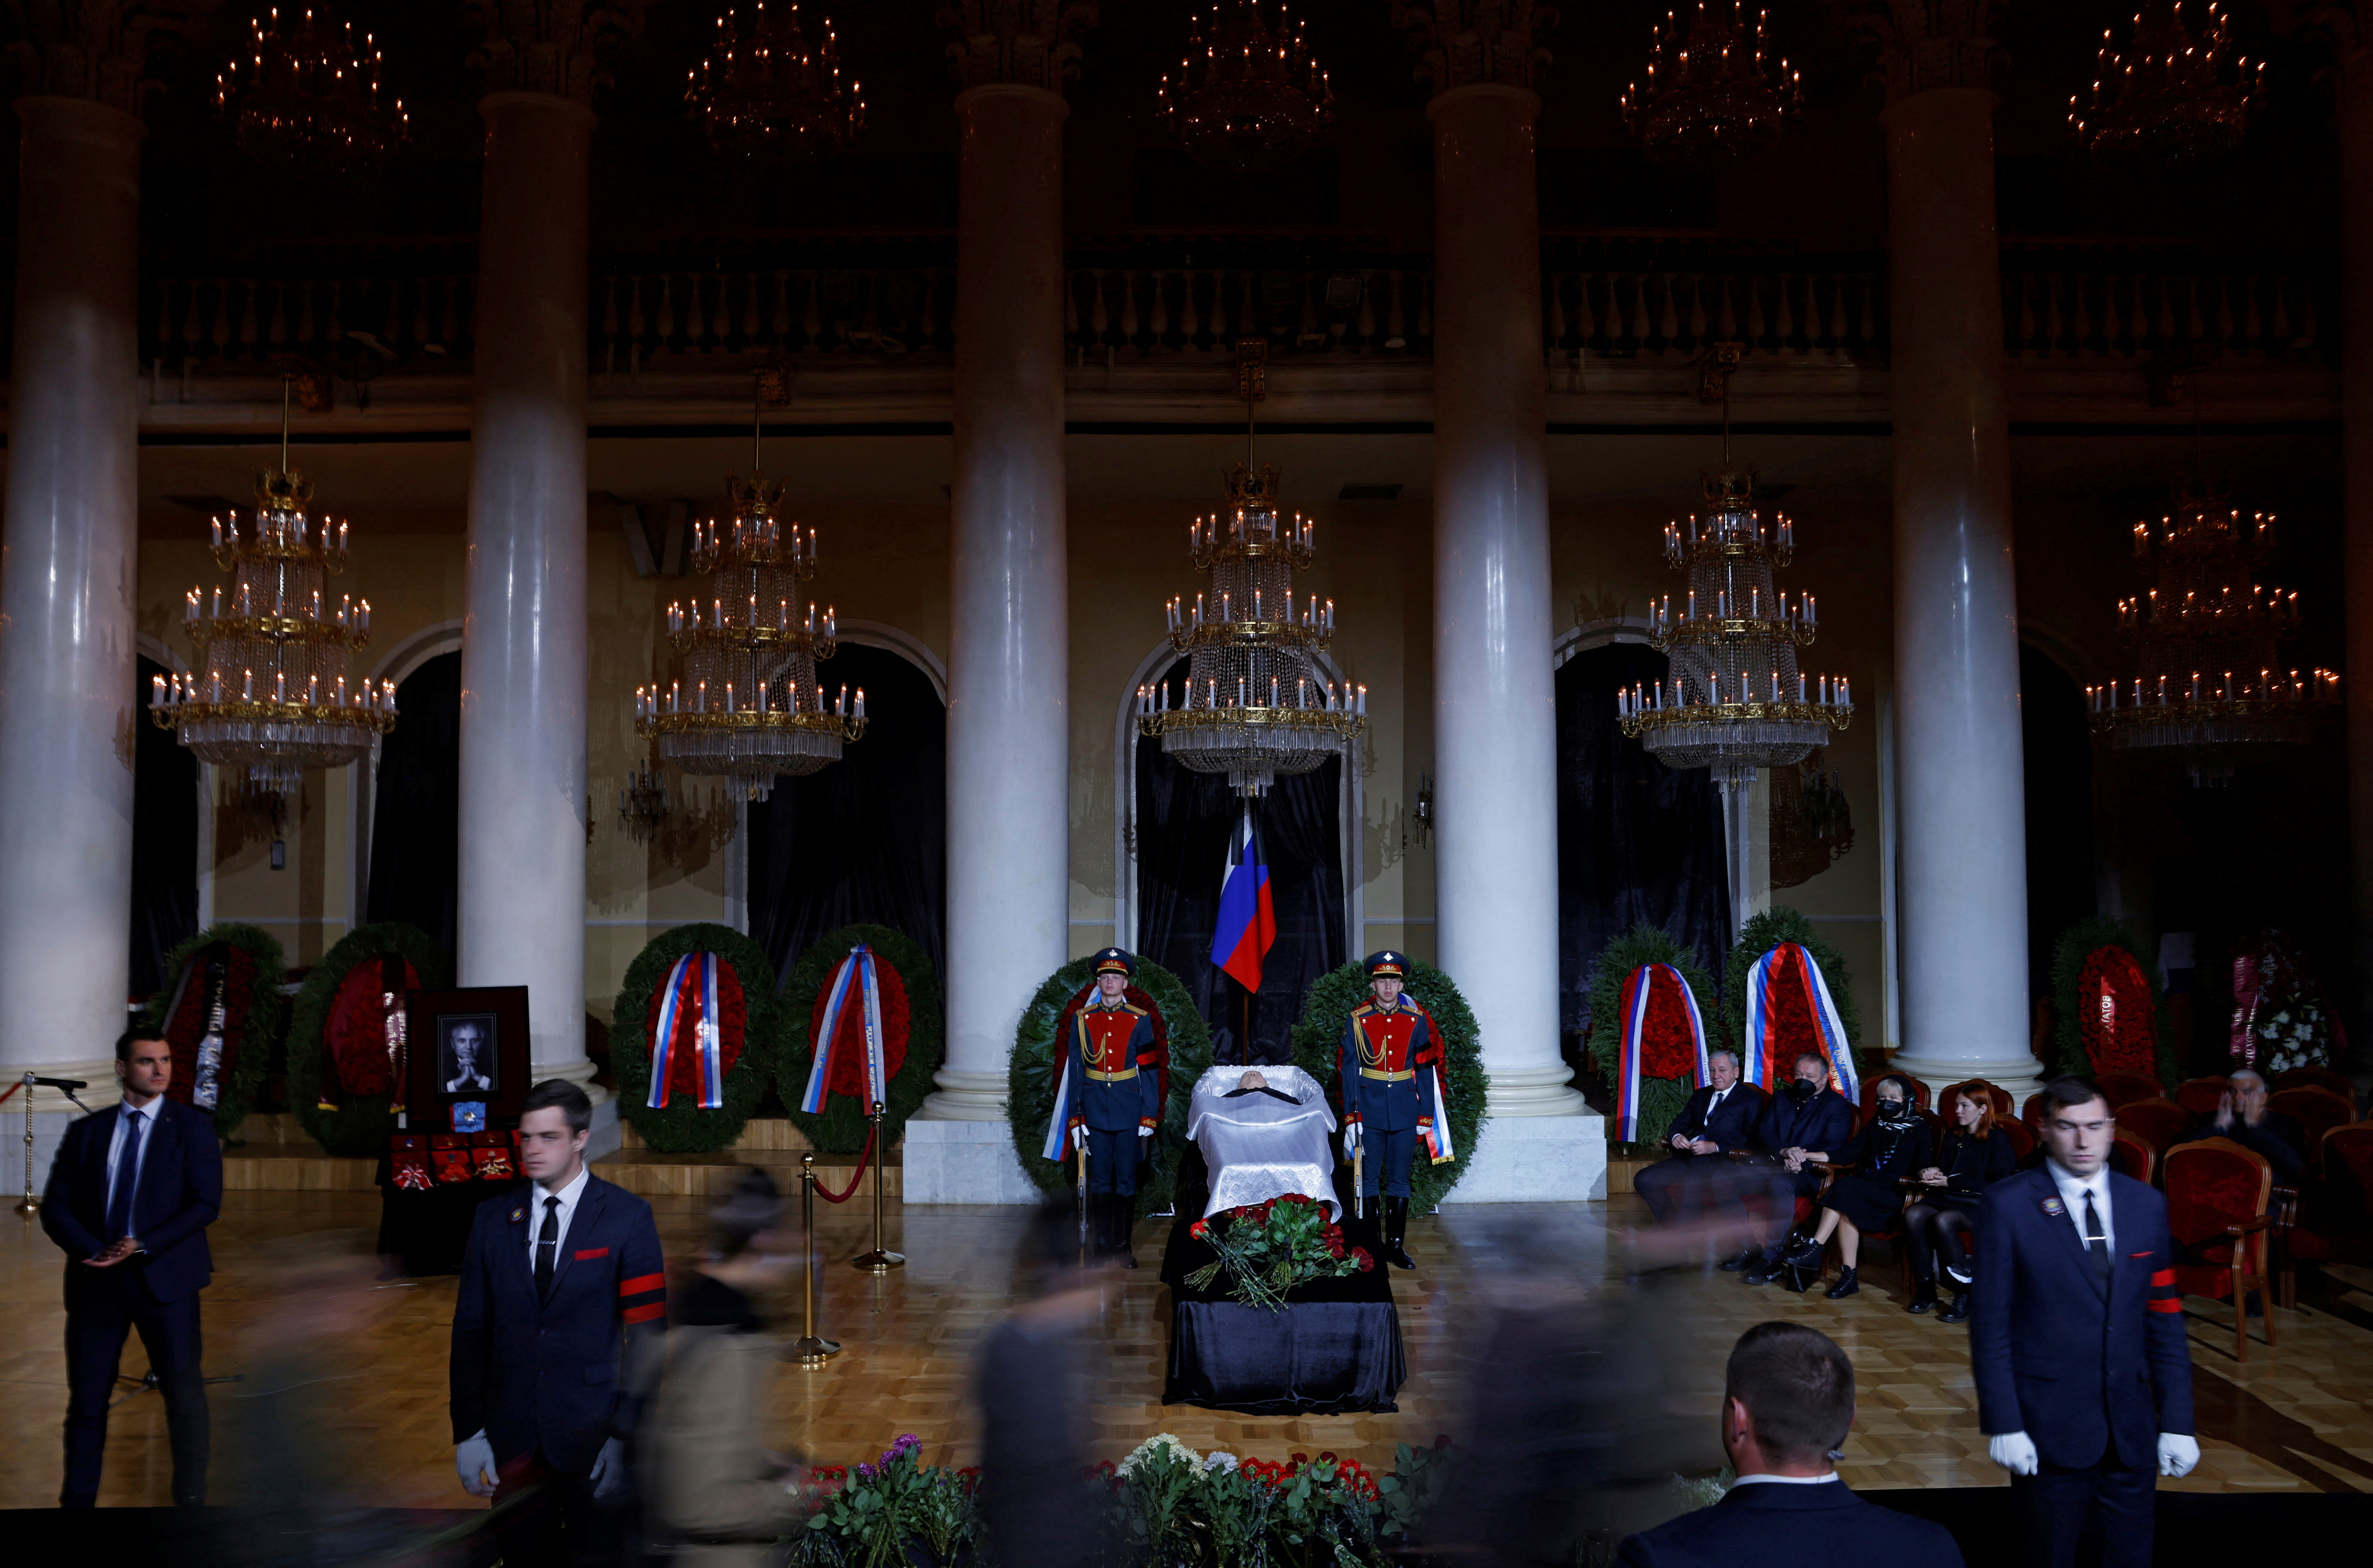 Memorial service for the Soviet Union's last leader Mikhail Gorbachev in Moscow